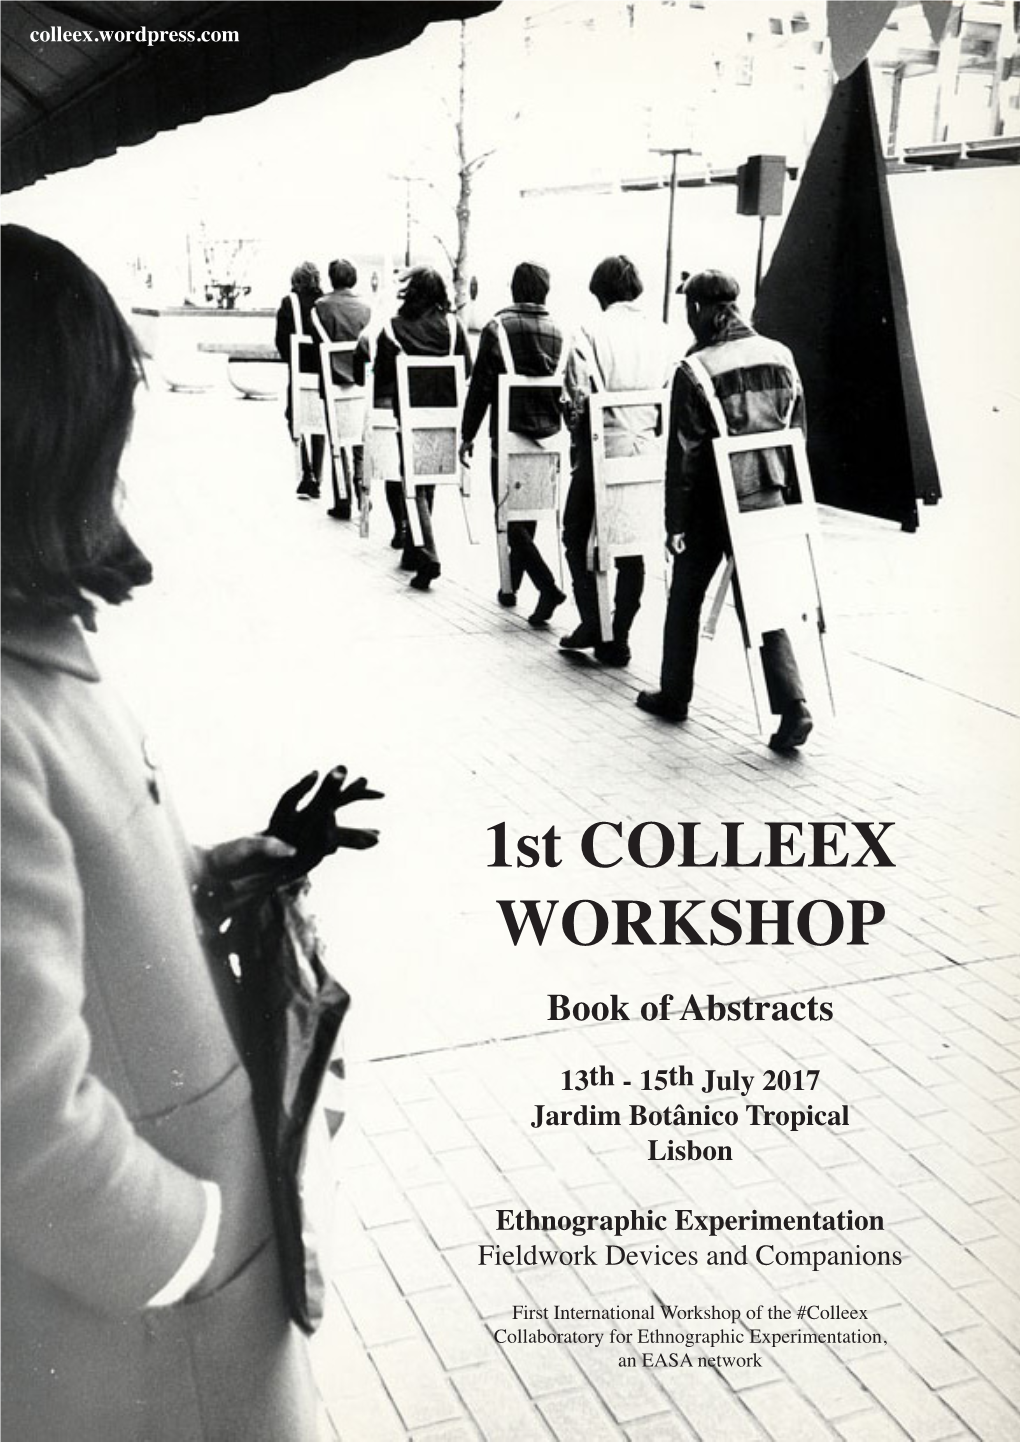 1St COLLEEX WORKSHOP Book of Abstracts